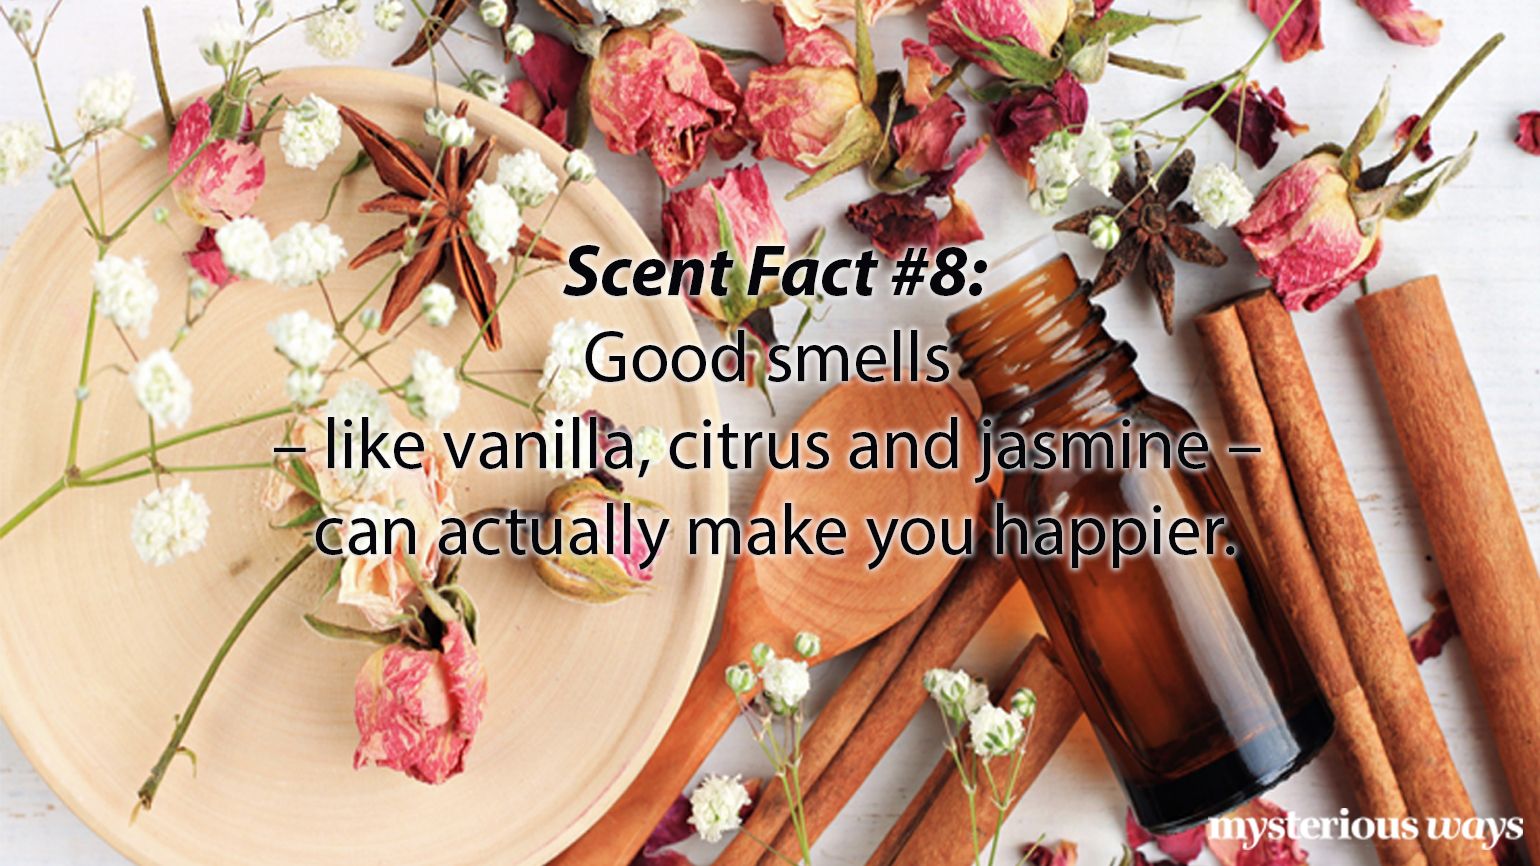 Pleasant smells like vanilla, citrus, and jasmine can actually make you feel better